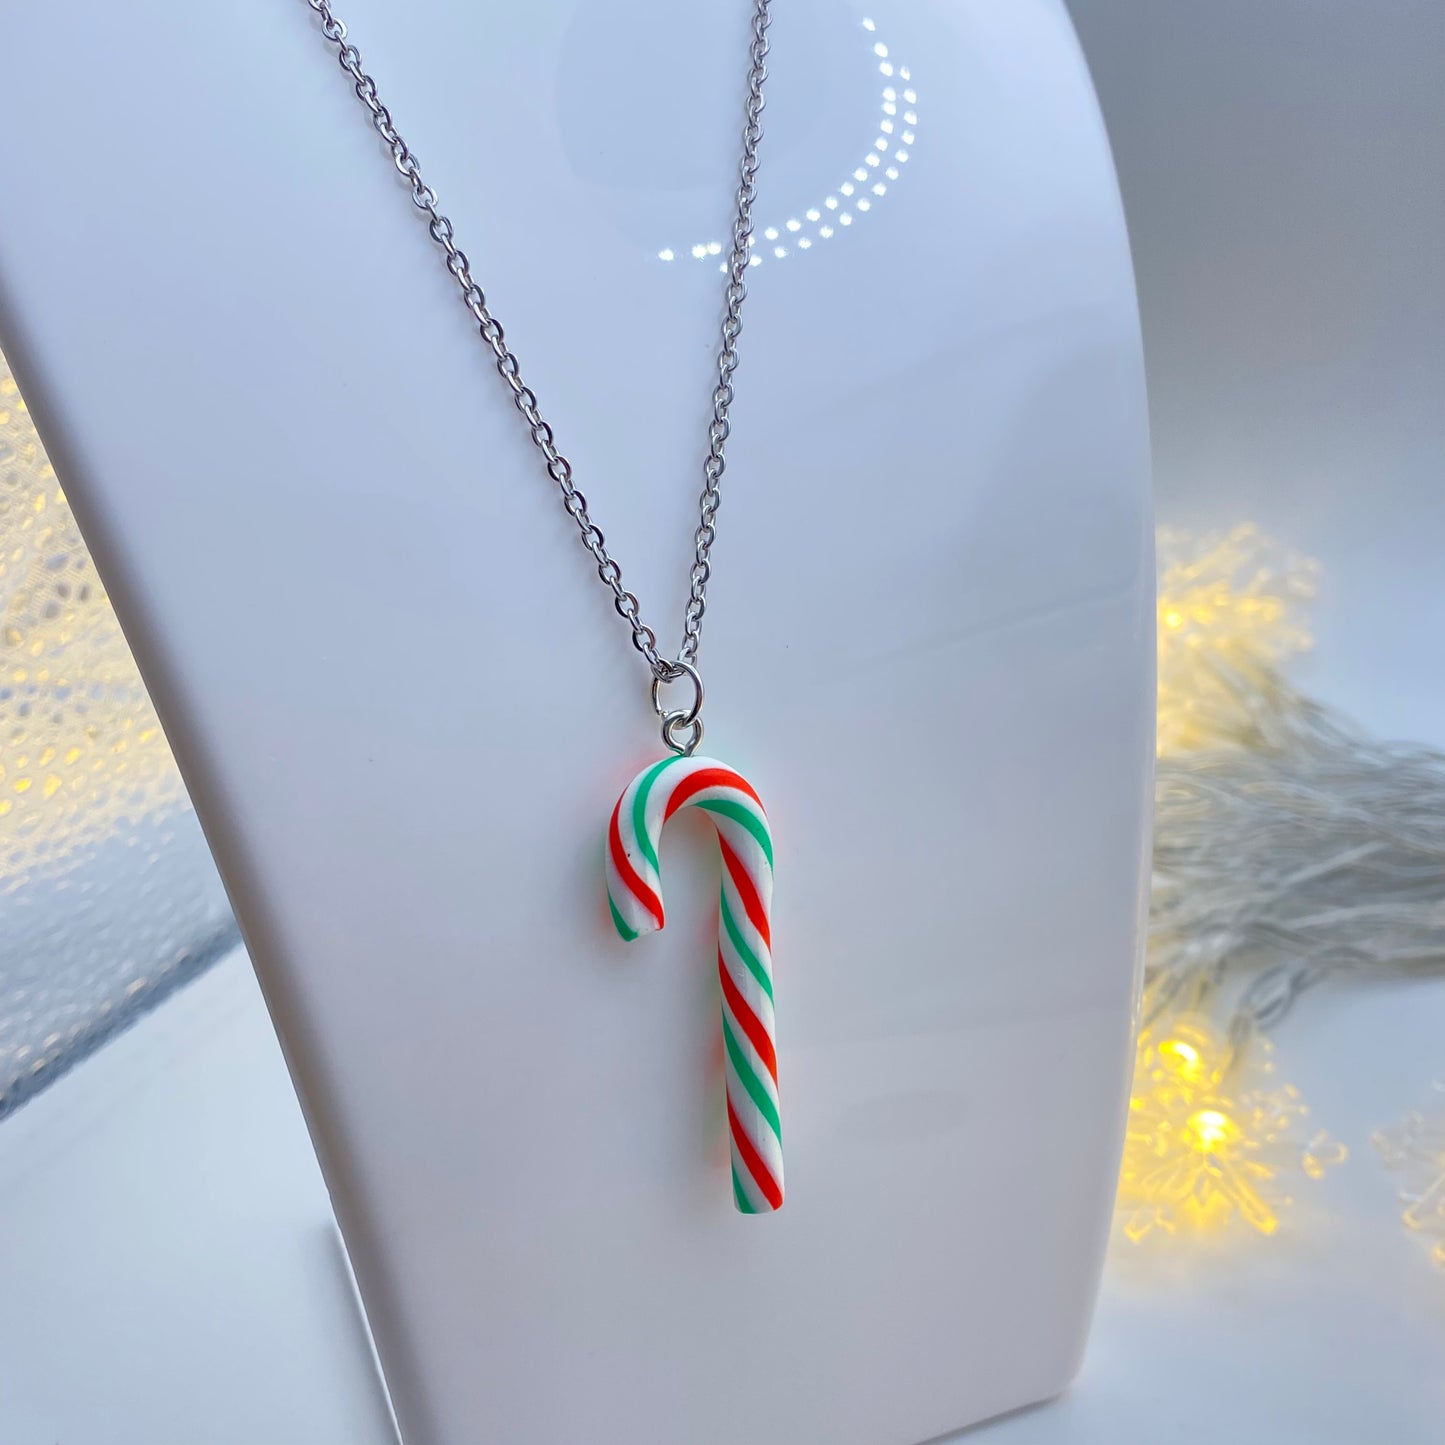 Green Candy Cane Necklace